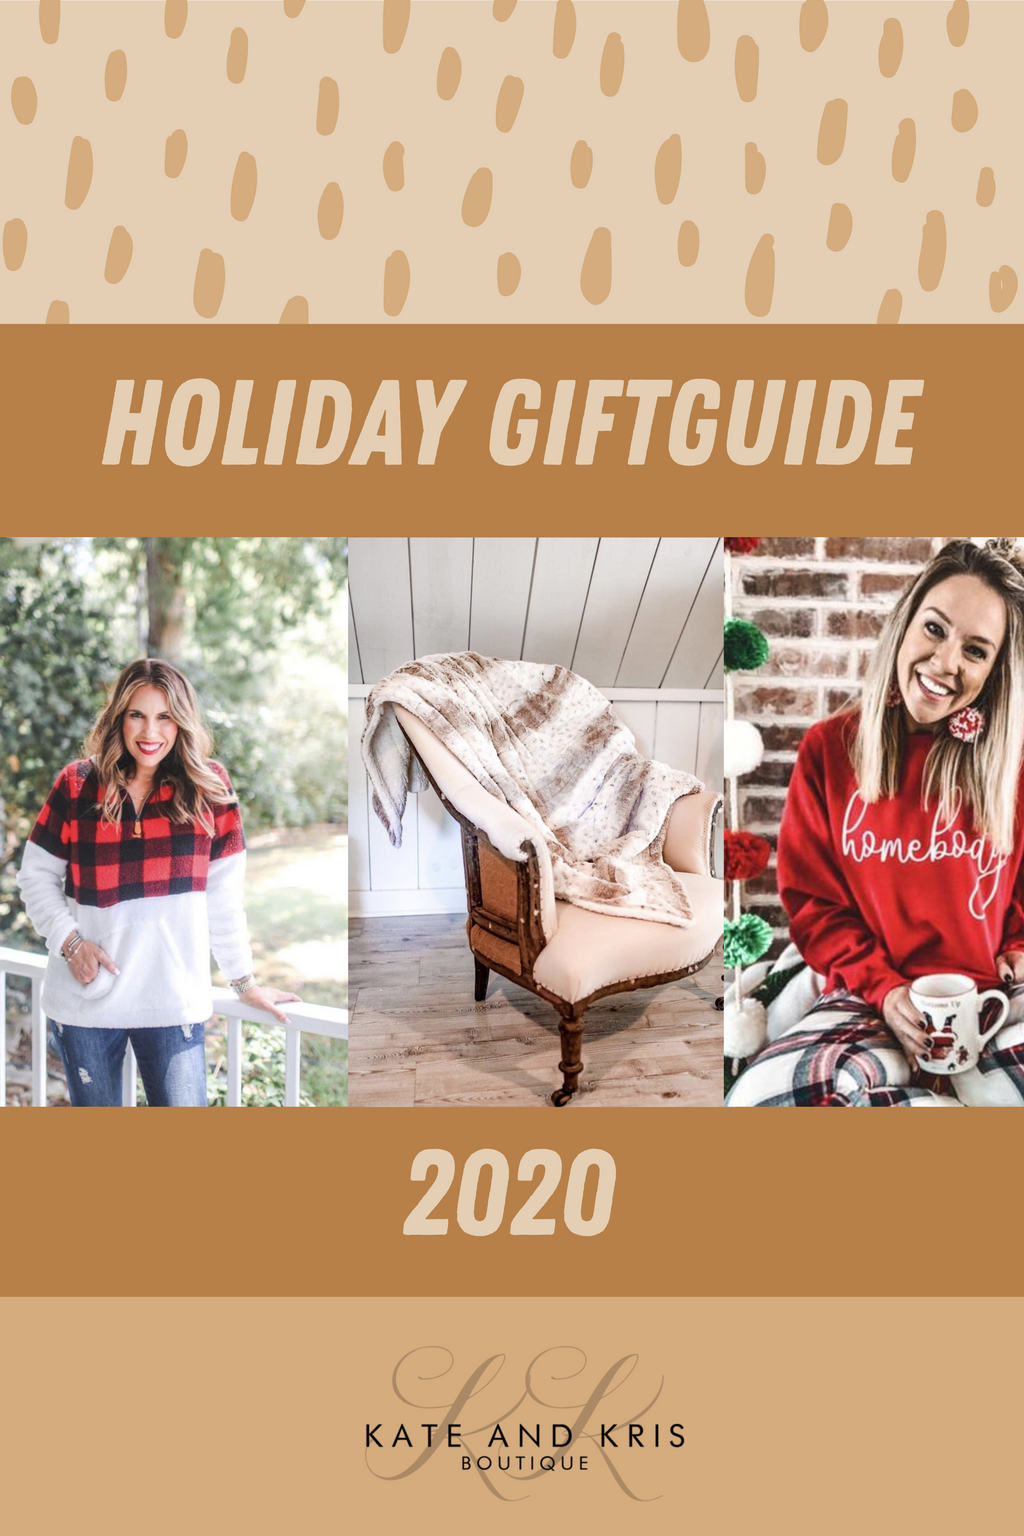 Kate & Kris Holiday Gift Guide 2020 ✨